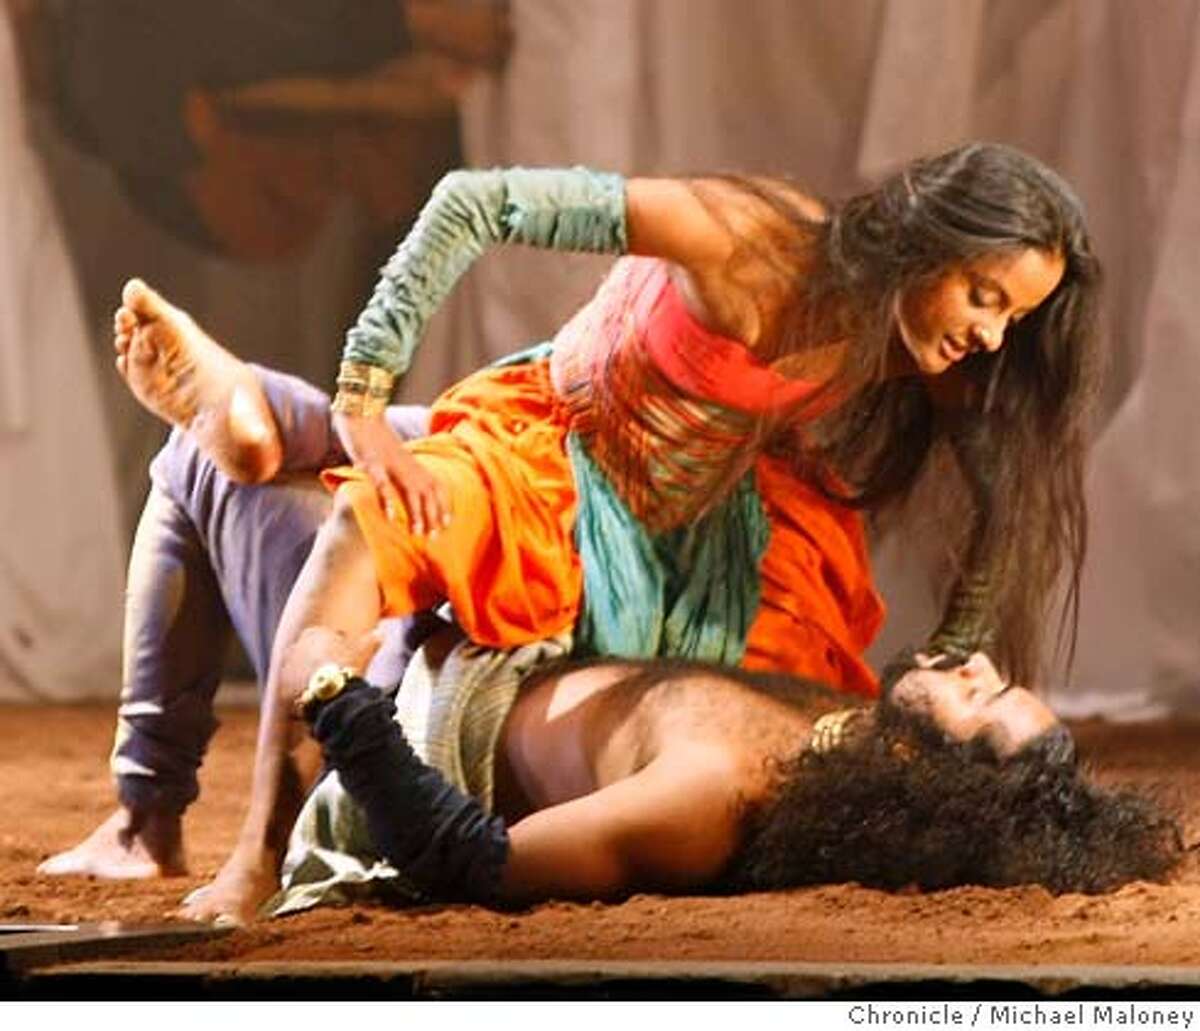 Archana Ramaswamy, top, playing Titania, Queen of the Fairies, below her is P R Jijoy, playing Oberon, King of the Fairies, during the matinee performance of Shakespeare's A Midsummer Night's Dream at the Curran Theater in San Francisco, Calif., on May 7, 2008. Photo by Michael Maloney / San Francisco Chronicle